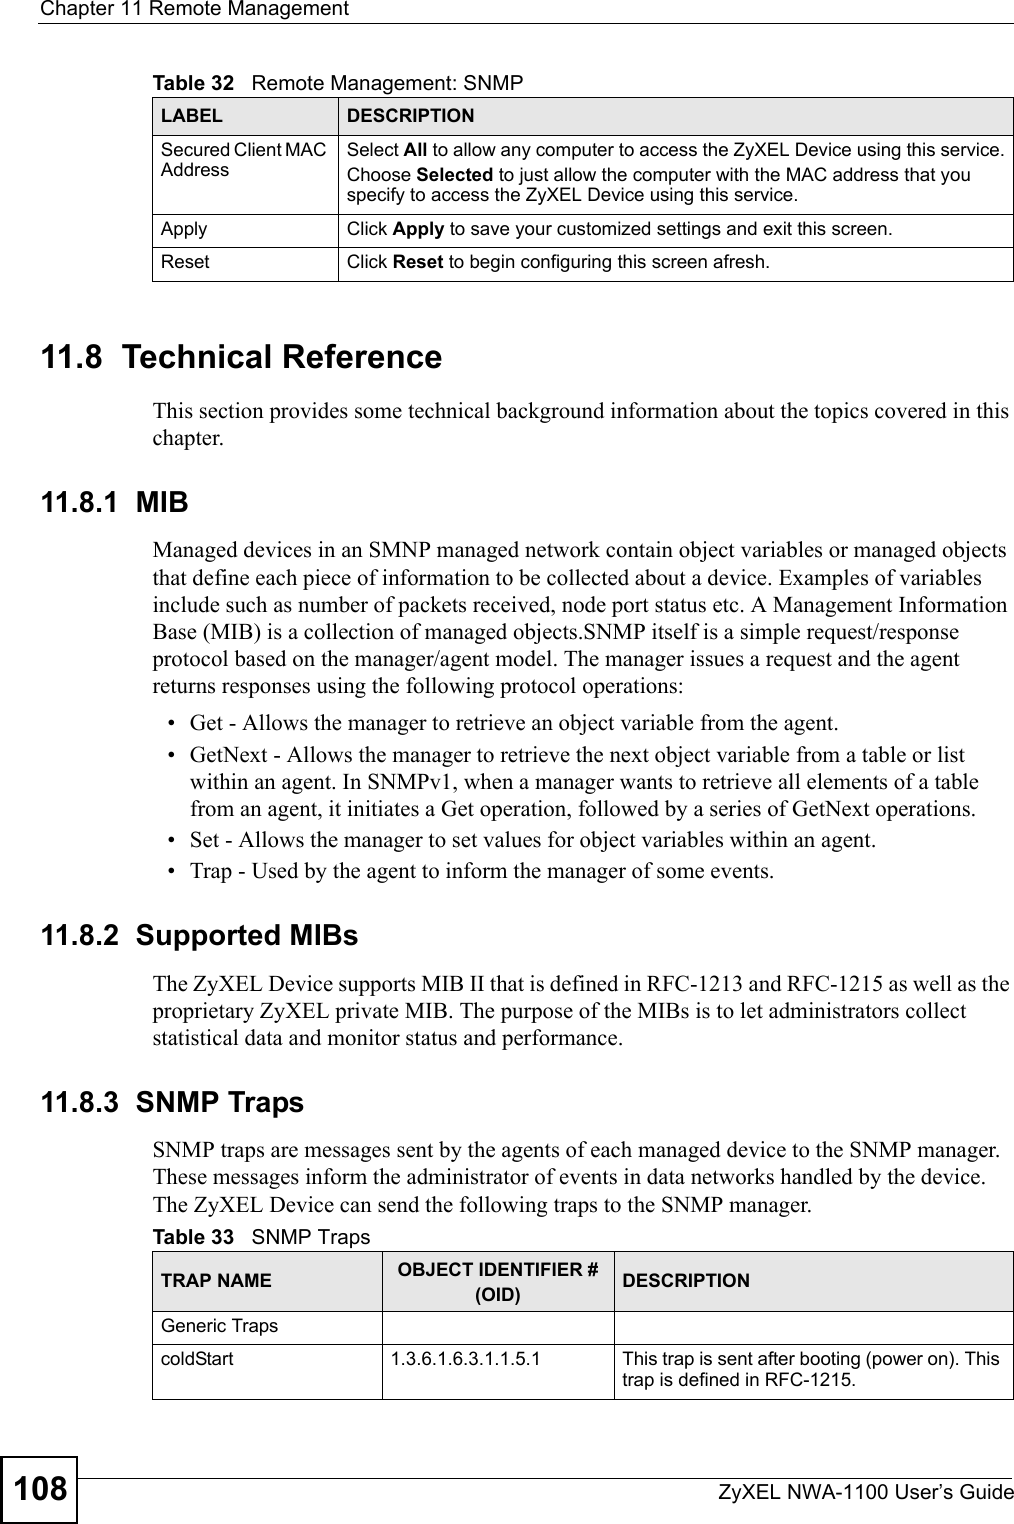 Chapter 11 Remote ManagementZyXEL NWA-1100 User’s Guide10811.8  Technical ReferenceThis section provides some technical background information about the topics covered in this chapter. 11.8.1  MIBManaged devices in an SMNP managed network contain object variables or managed objects that define each piece of information to be collected about a device. Examples of variables include such as number of packets received, node port status etc. A Management Information Base (MIB) is a collection of managed objects.SNMP itself is a simple request/response protocol based on the manager/agent model. The manager issues a request and the agent returns responses using the following protocol operations:• Get - Allows the manager to retrieve an object variable from the agent. • GetNext - Allows the manager to retrieve the next object variable from a table or list within an agent. In SNMPv1, when a manager wants to retrieve all elements of a table from an agent, it initiates a Get operation, followed by a series of GetNext operations. • Set - Allows the manager to set values for object variables within an agent. • Trap - Used by the agent to inform the manager of some events.11.8.2  Supported MIBsThe ZyXEL Device supports MIB II that is defined in RFC-1213 and RFC-1215 as well as the proprietary ZyXEL private MIB. The purpose of the MIBs is to let administrators collect statistical data and monitor status and performance.11.8.3  SNMP Traps SNMP traps are messages sent by the agents of each managed device to the SNMP manager. These messages inform the administrator of events in data networks handled by the device.  The ZyXEL Device can send the following traps to the SNMP manager. Secured Client MAC AddressSelect All to allow any computer to access the ZyXEL Device using this service.Choose Selected to just allow the computer with the MAC address that you specify to access the ZyXEL Device using this service.Apply Click Apply to save your customized settings and exit this screen. Reset Click Reset to begin configuring this screen afresh.Table 32   Remote Management: SNMPLABEL DESCRIPTIONTable 33   SNMP TrapsTRAP NAME OBJECT IDENTIFIER # (OID) DESCRIPTIONGeneric TrapscoldStart  1.3.6.1.6.3.1.1.5.1 This trap is sent after booting (power on). This trap is defined in RFC-1215.